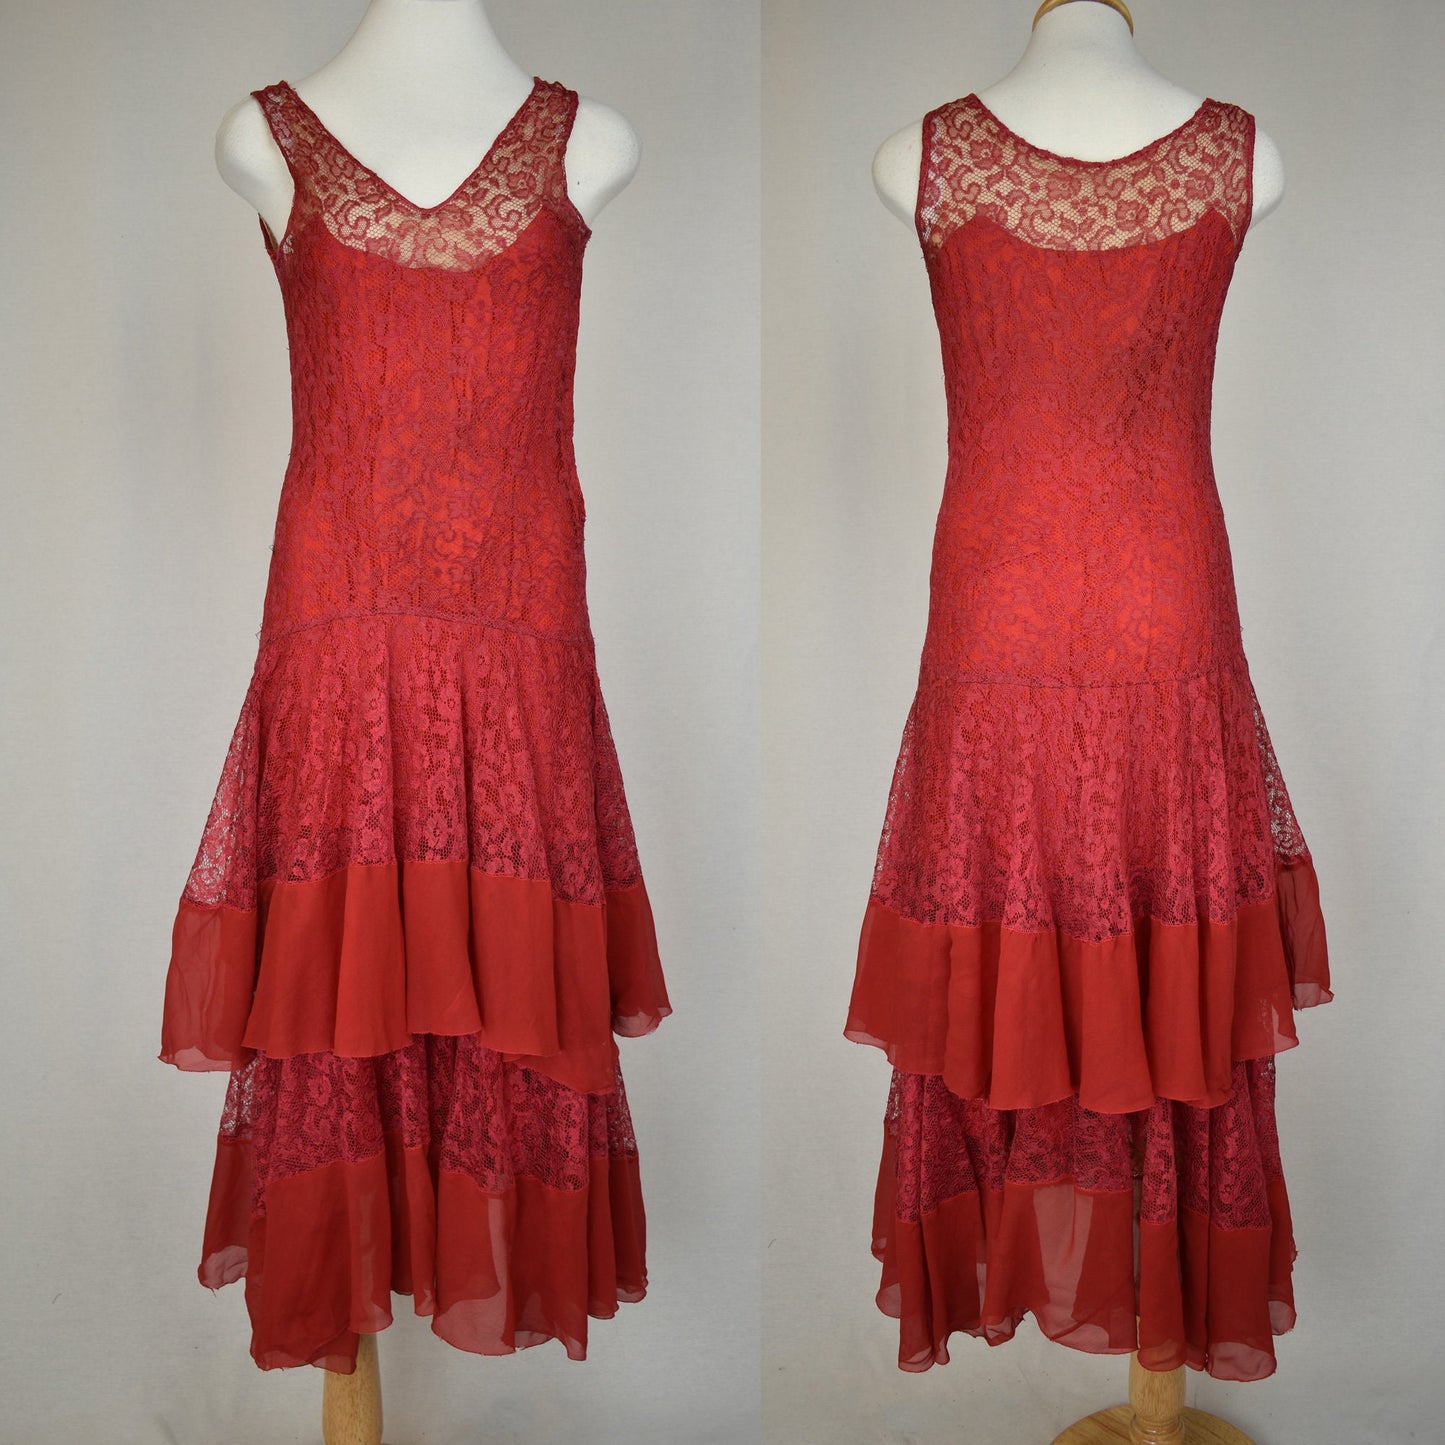 Vintage 1920s Long Tiered Red Lace Dress - Flapper Style - As Is Condition